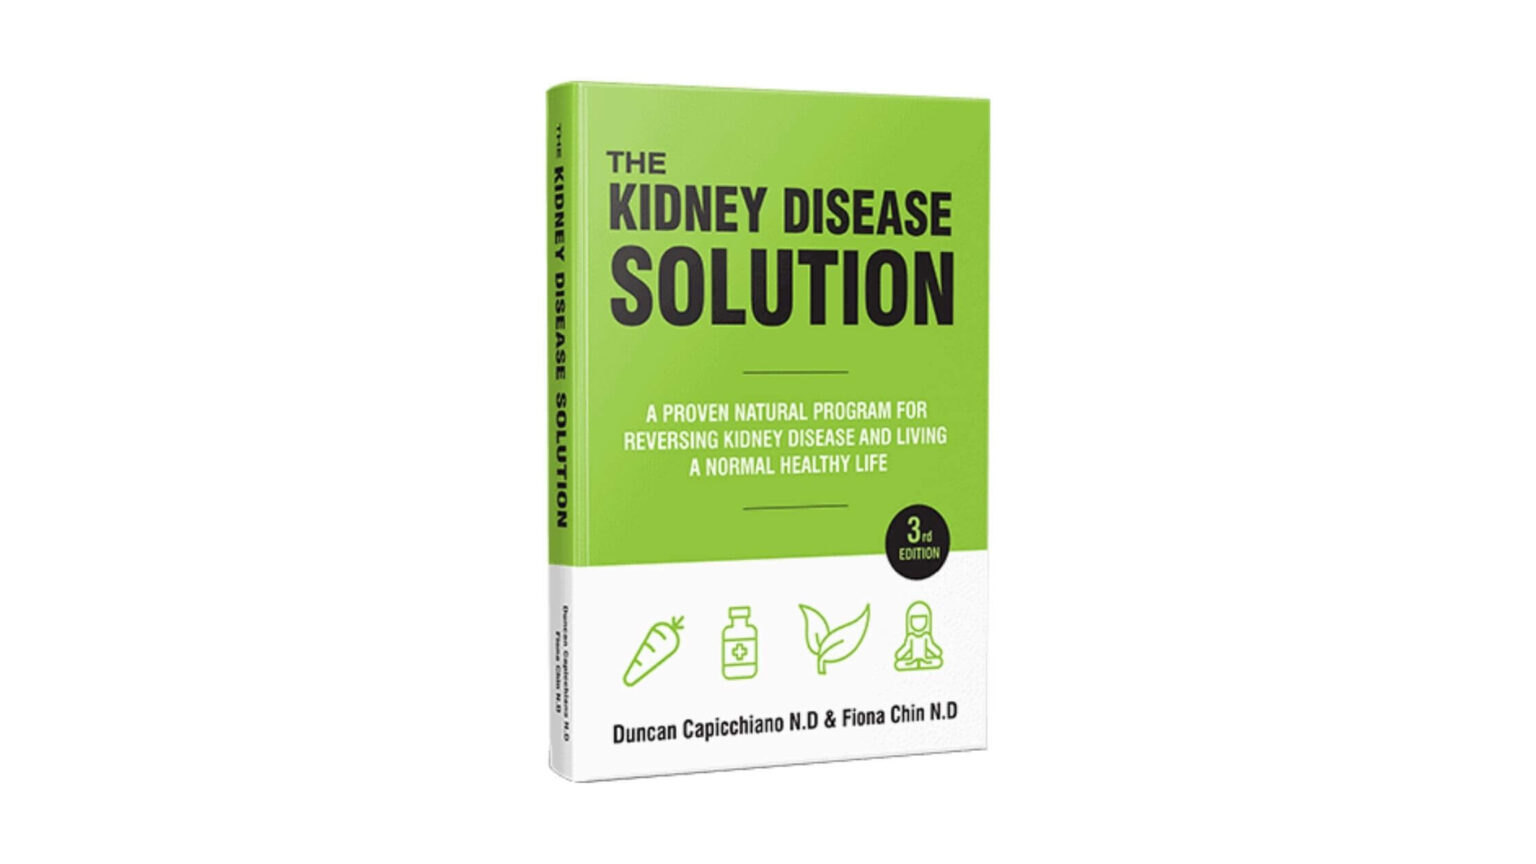 The Kidney Disease Solution is a comprehensive 243-page guide that explains the entire kidney-healing process. But does it help?